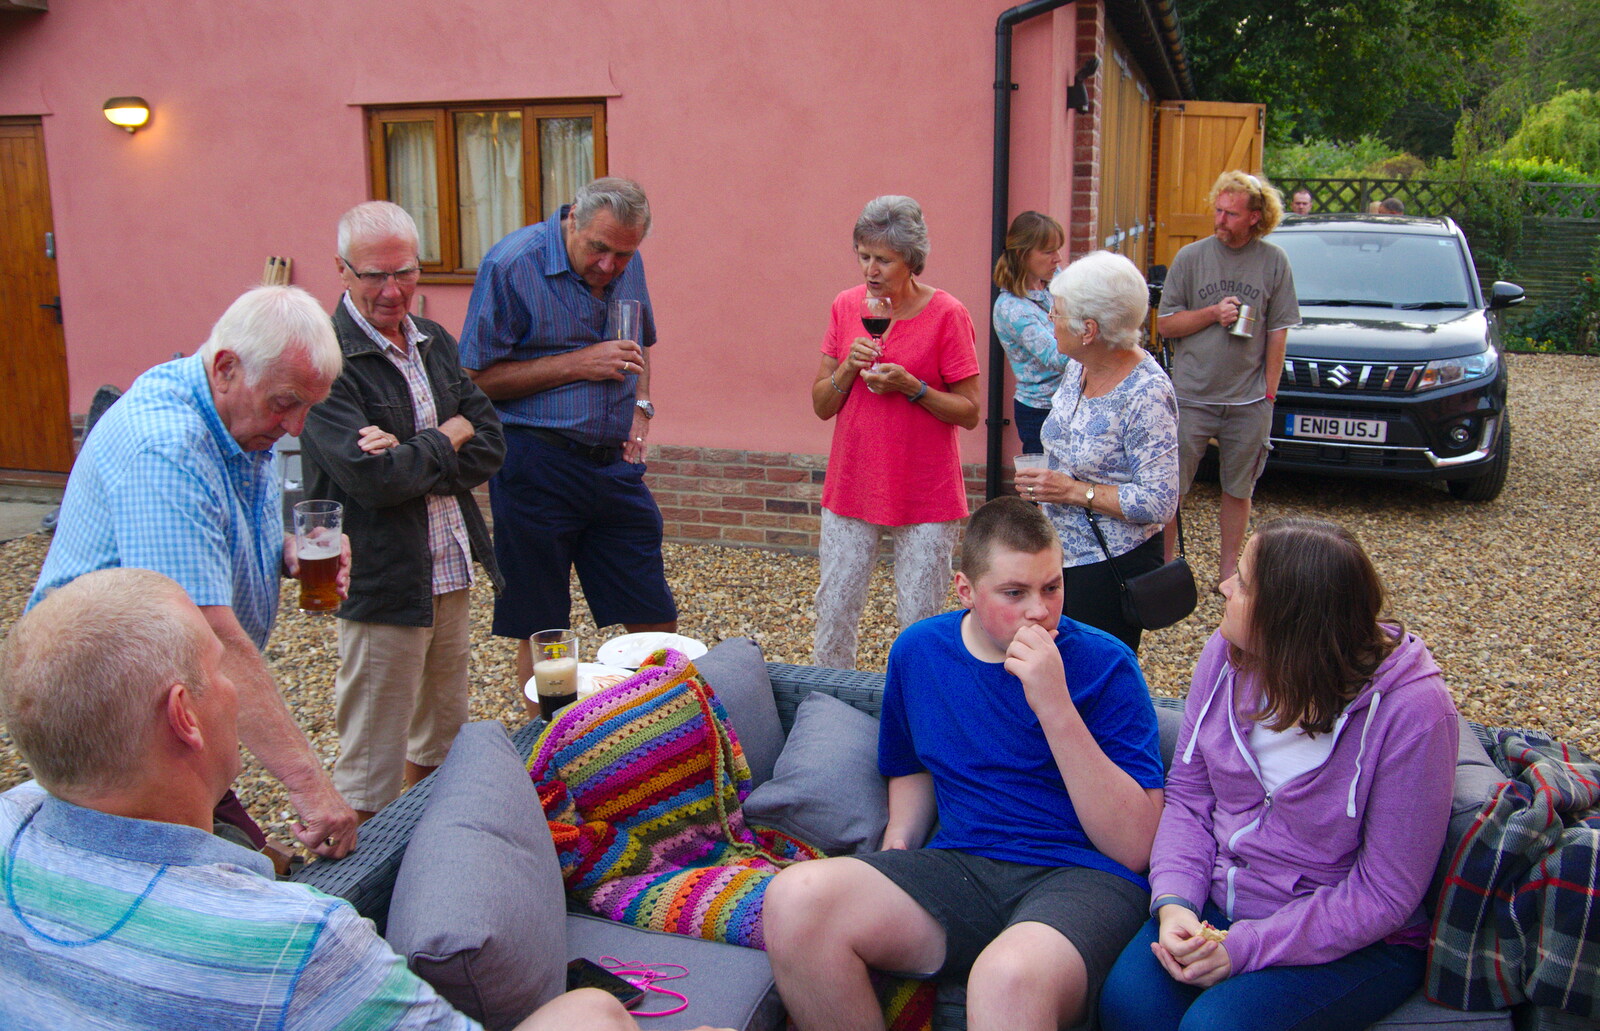 The pub gang chat from A Summer Party, Brome, Suffolk - 3rd August 2019